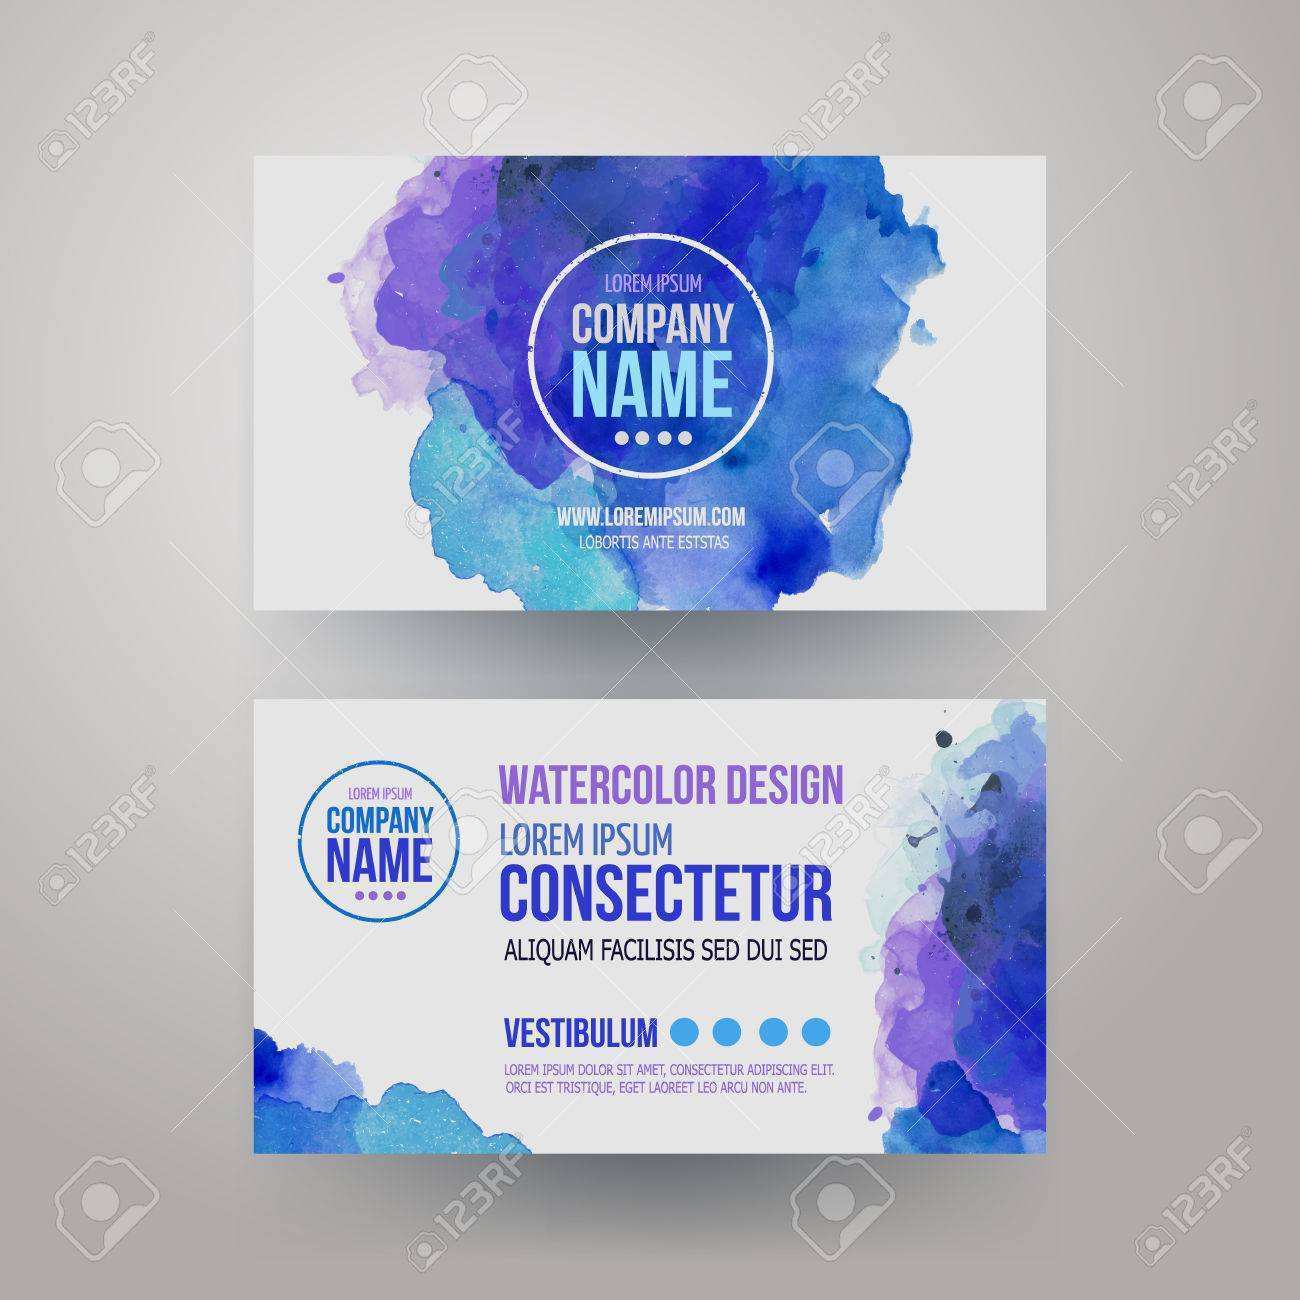 51 Printable Business Card Templates Watercolor in Word for Business Card Templates Watercolor